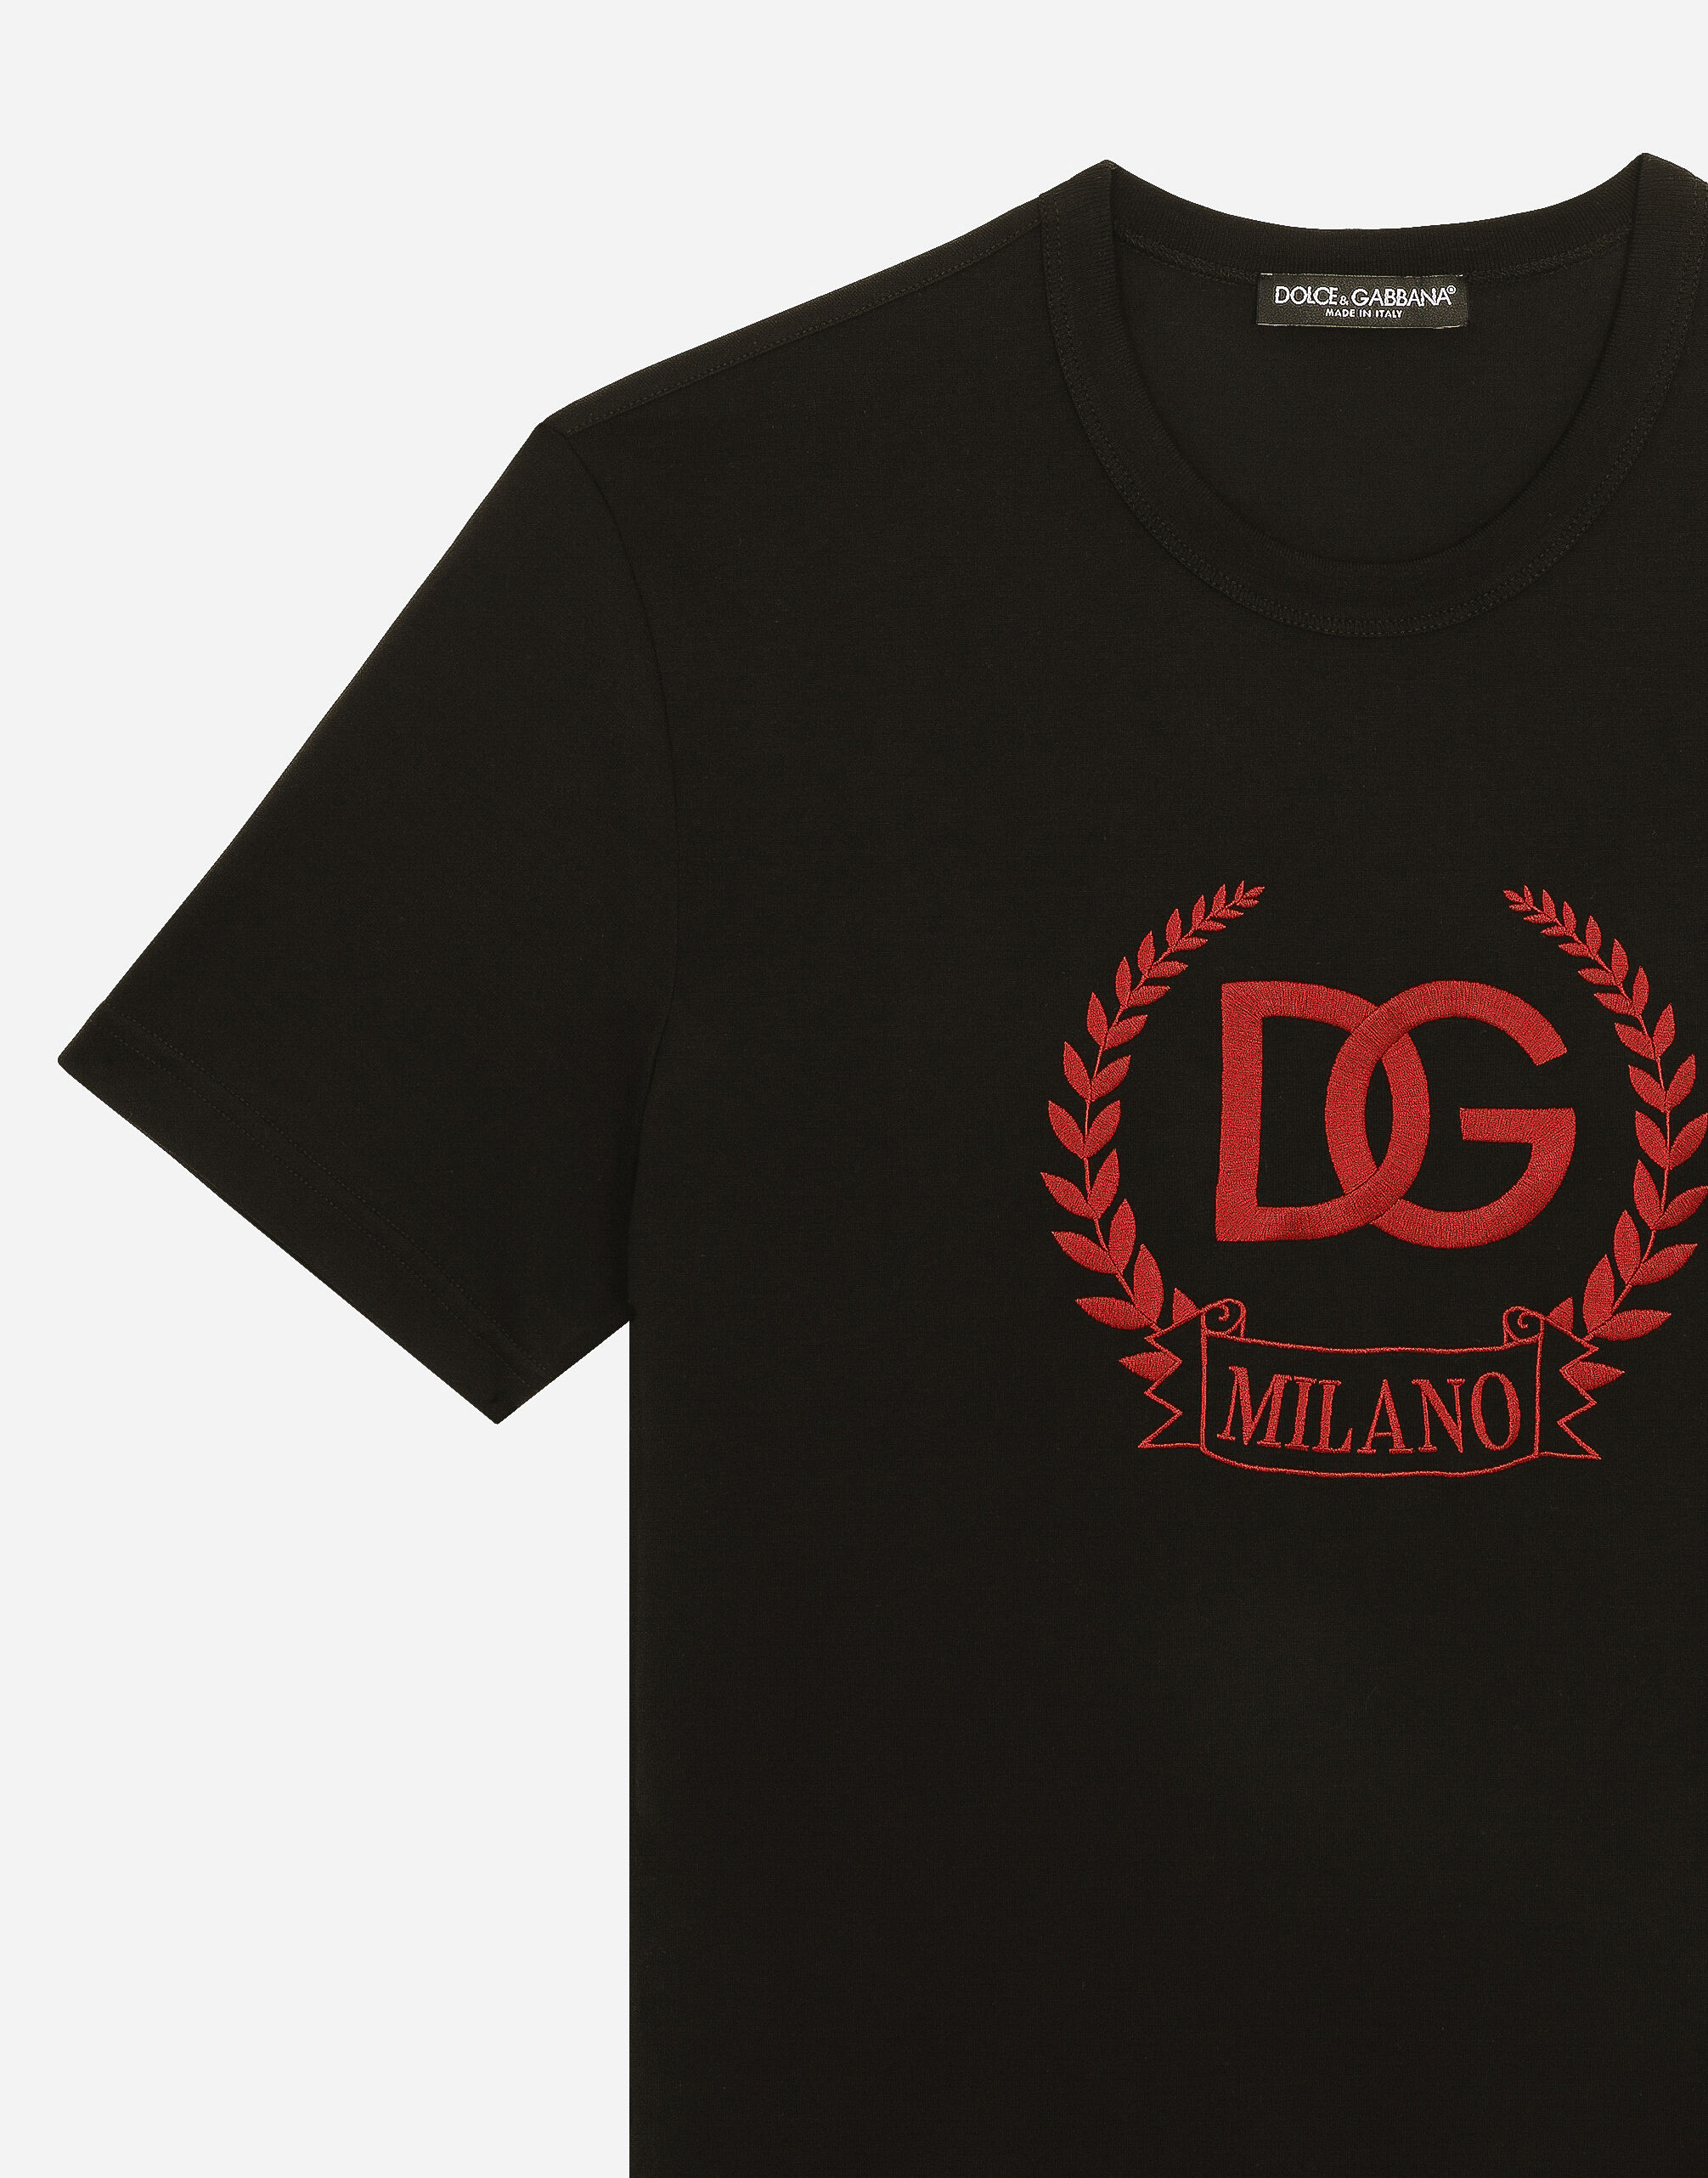 Cotton T-shirt with DG Milano logo embroidery in Black for